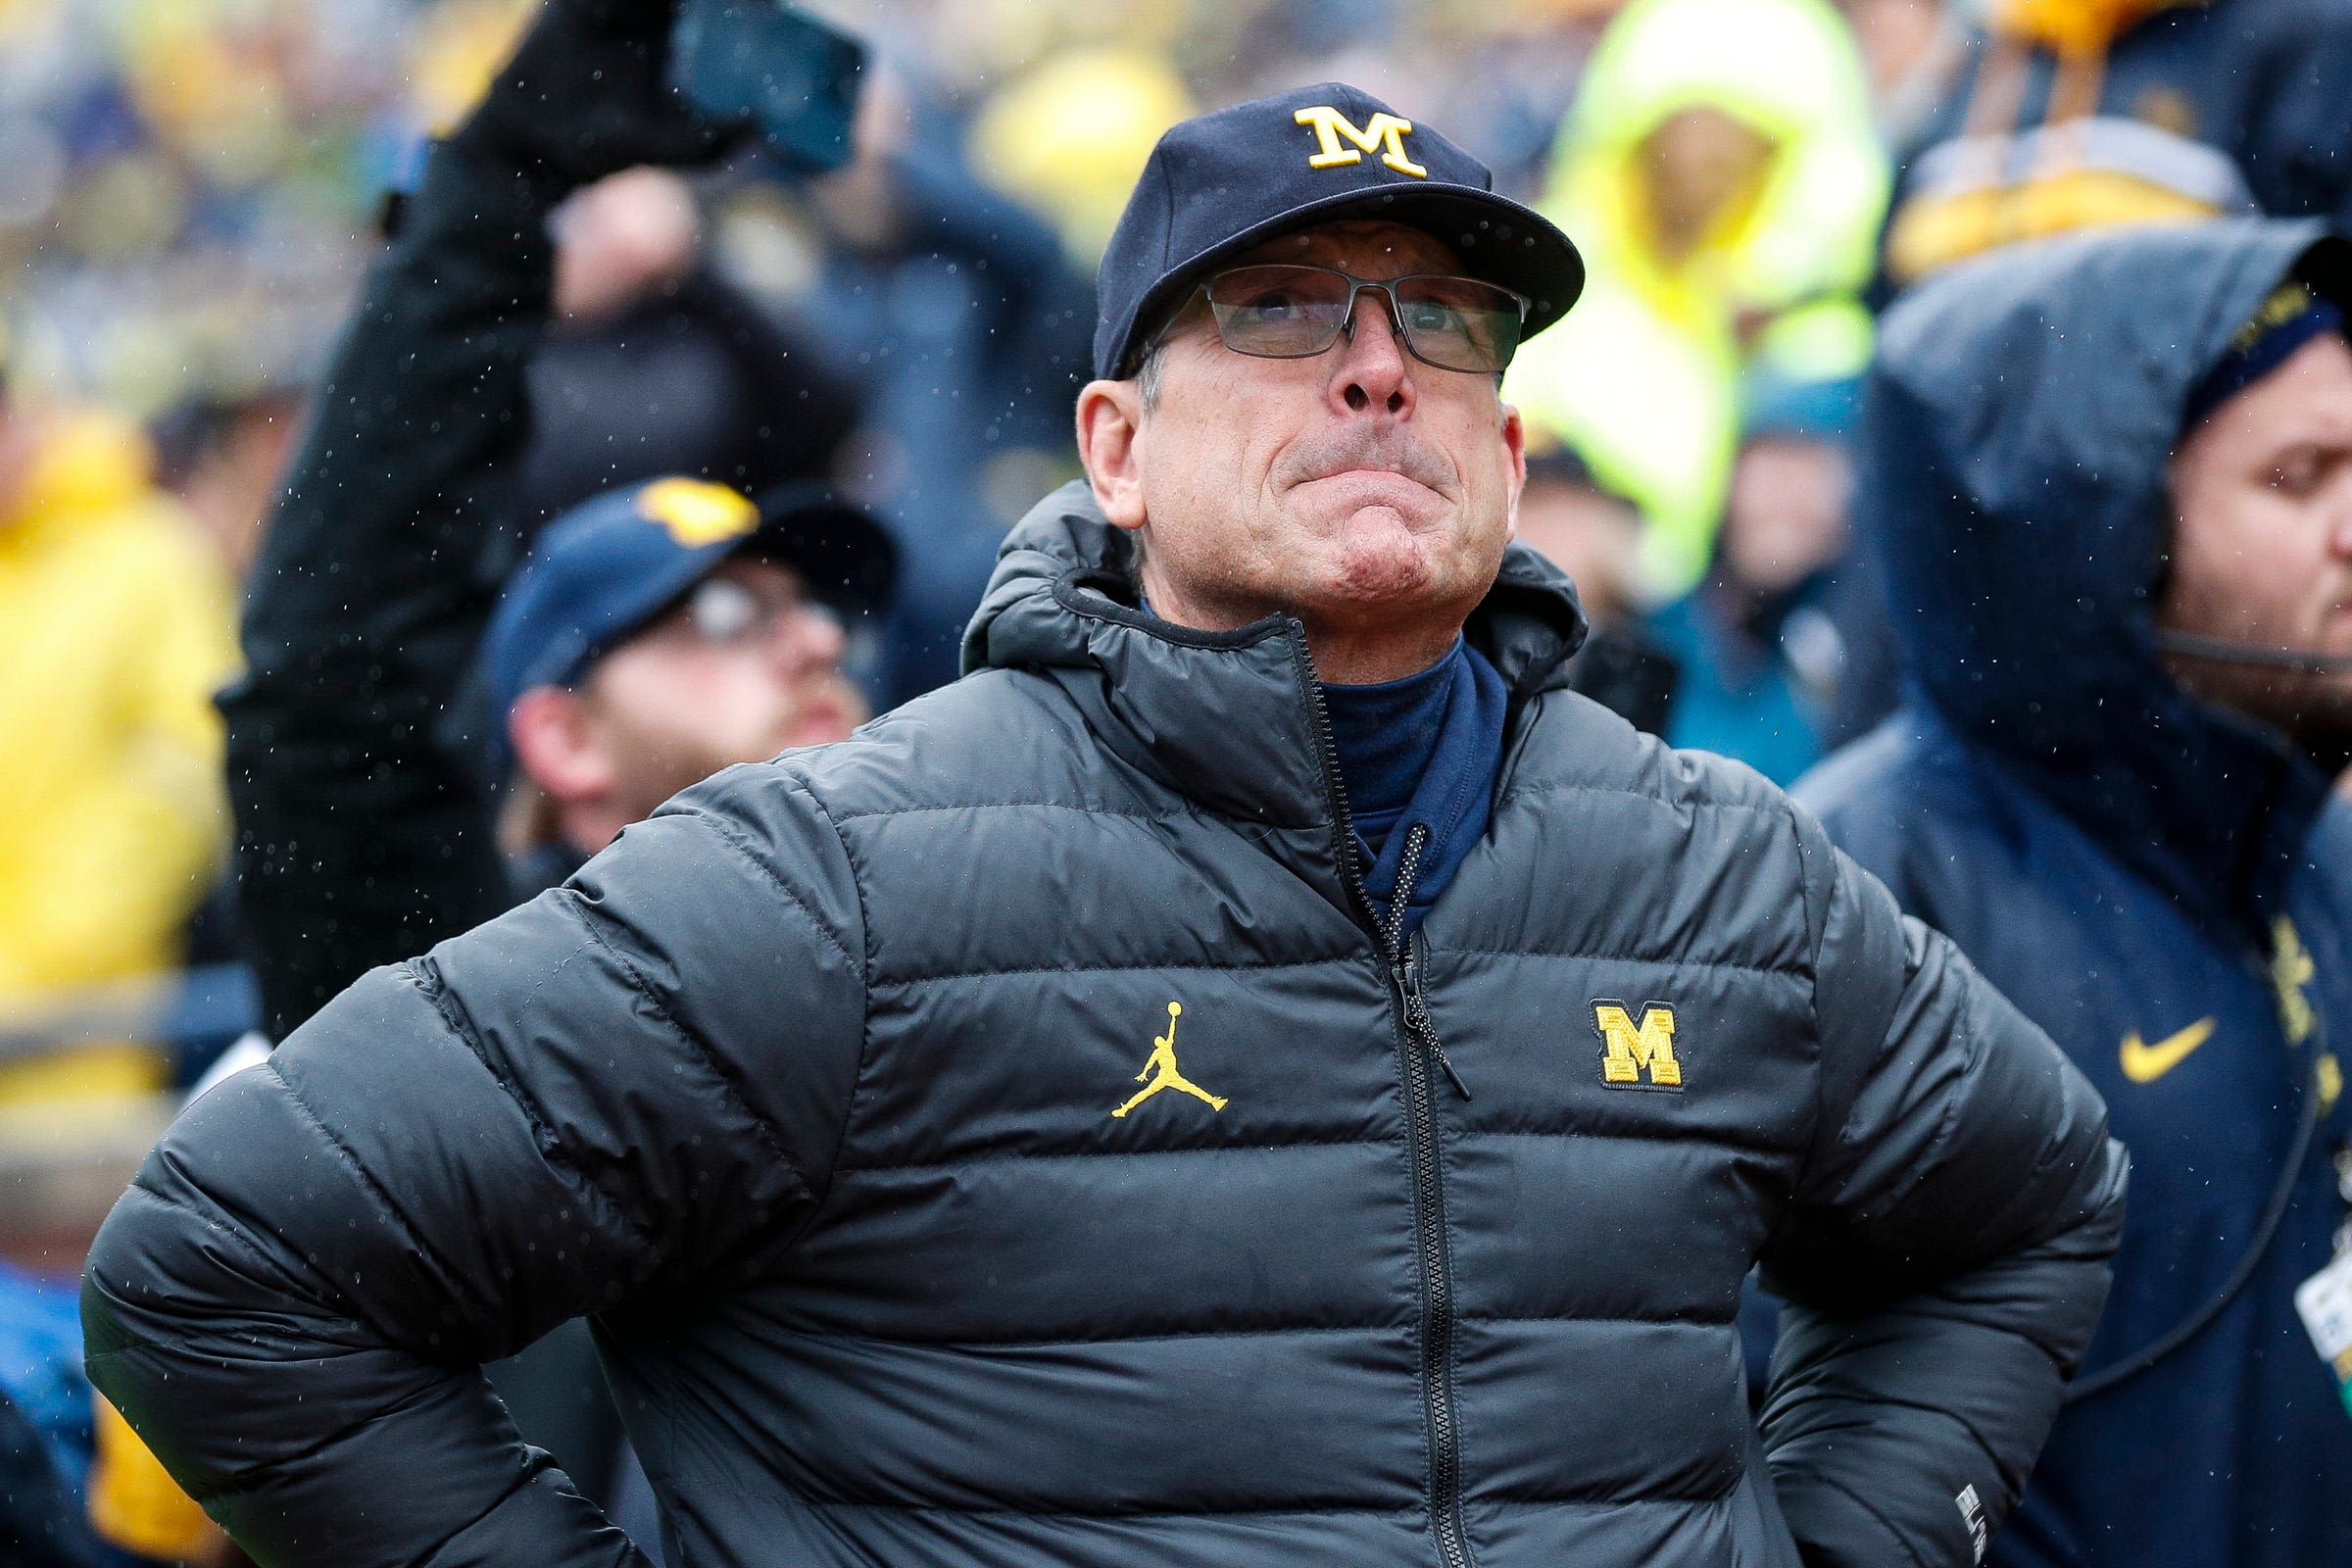 Netflix will release a documentary on Connor Stallions and Michigan’s cheating scandal